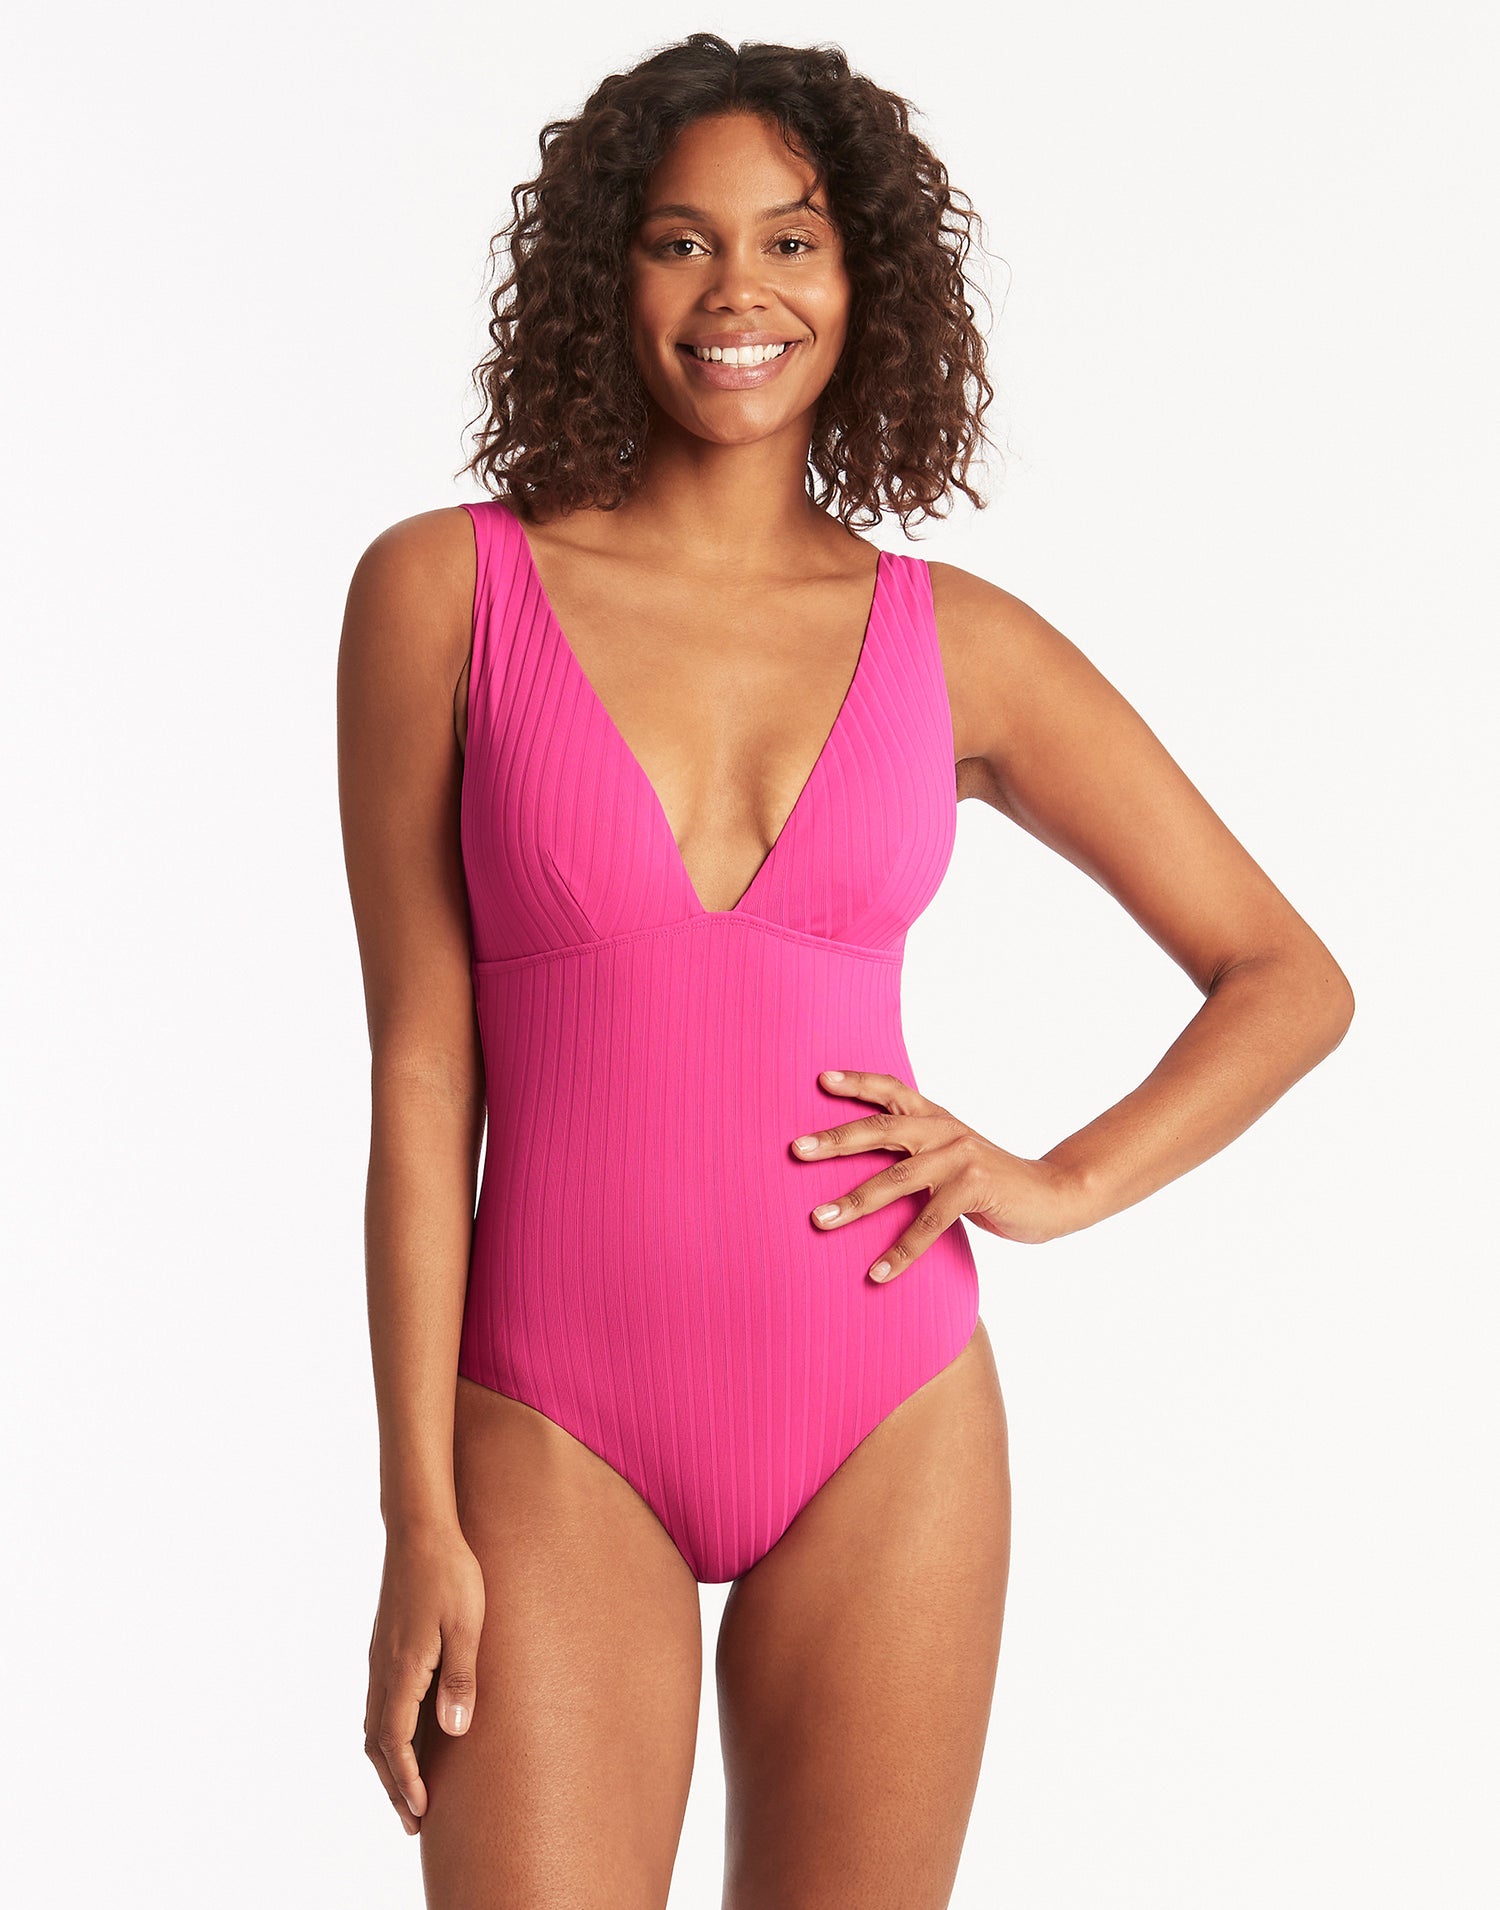 Vesper Longline One Piece by Sea Level in Hot Pink - Front View